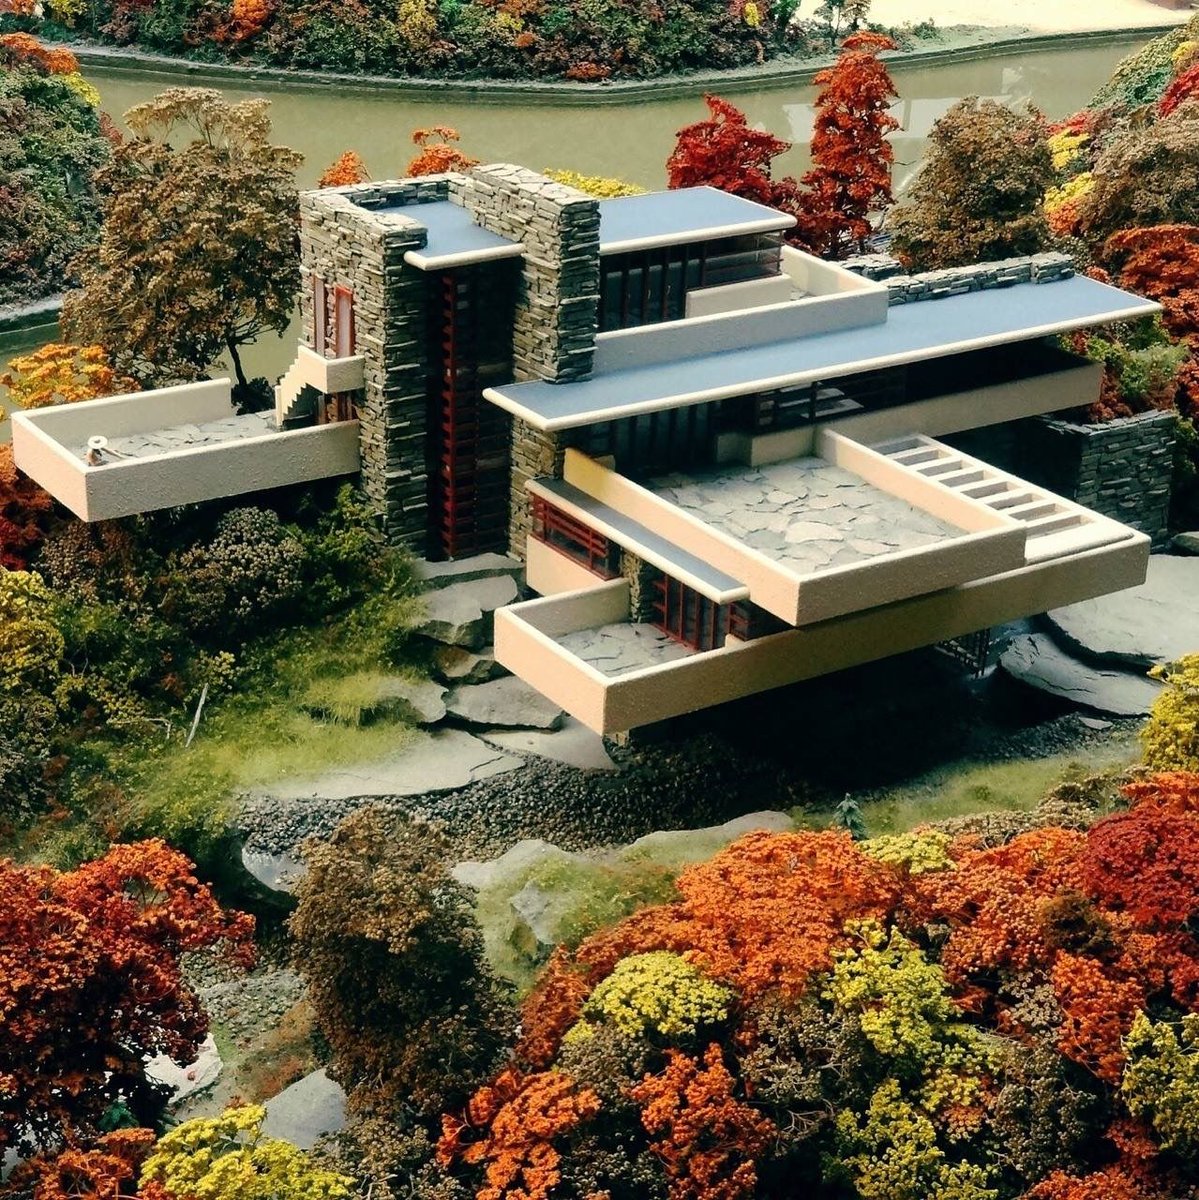 Falling Waters: I'm reminded of my (Serbian) sculpture professor butchering Shakespeare: "You shouldn't gild a rose." By taking a natural place and adding to it, he did not glorify the nature. He just added a stack of observation decks, like it's a zoo instead of a home.